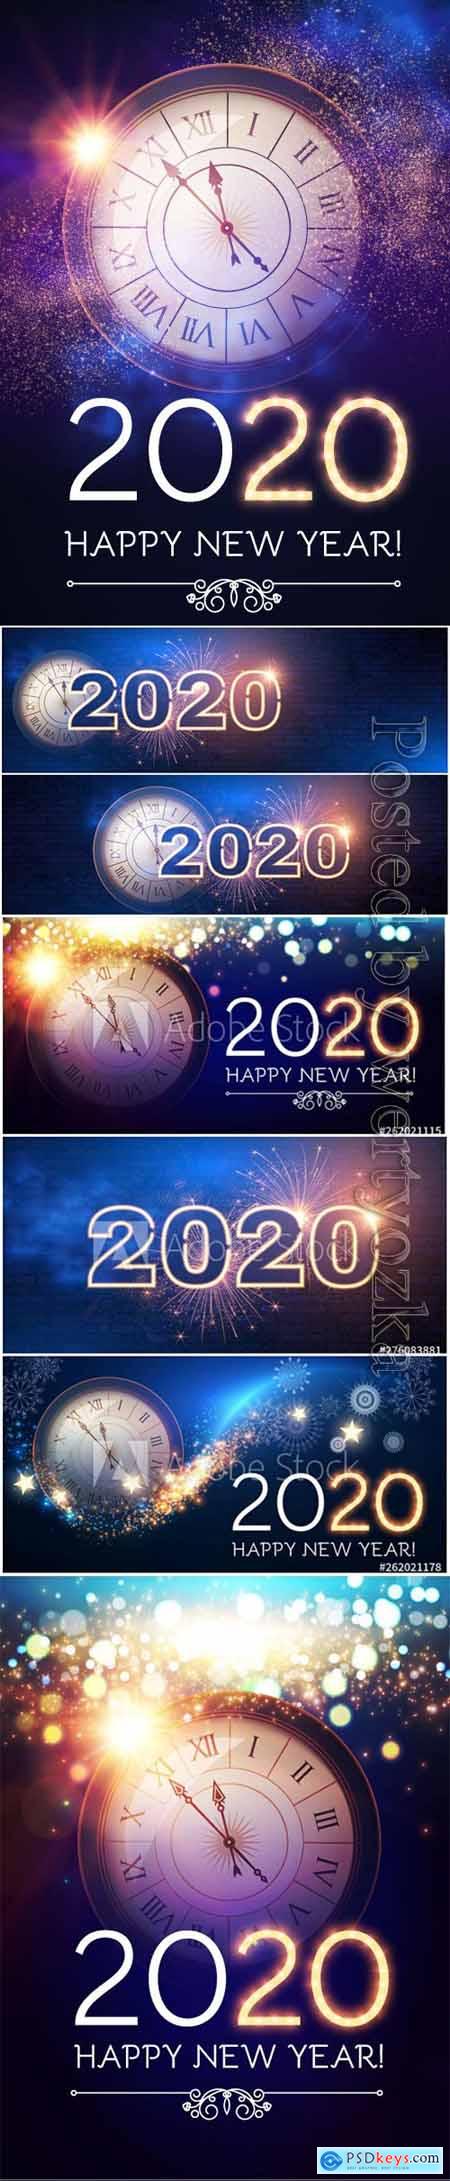 2020 Christmas and New Year vector backgrounds with clock